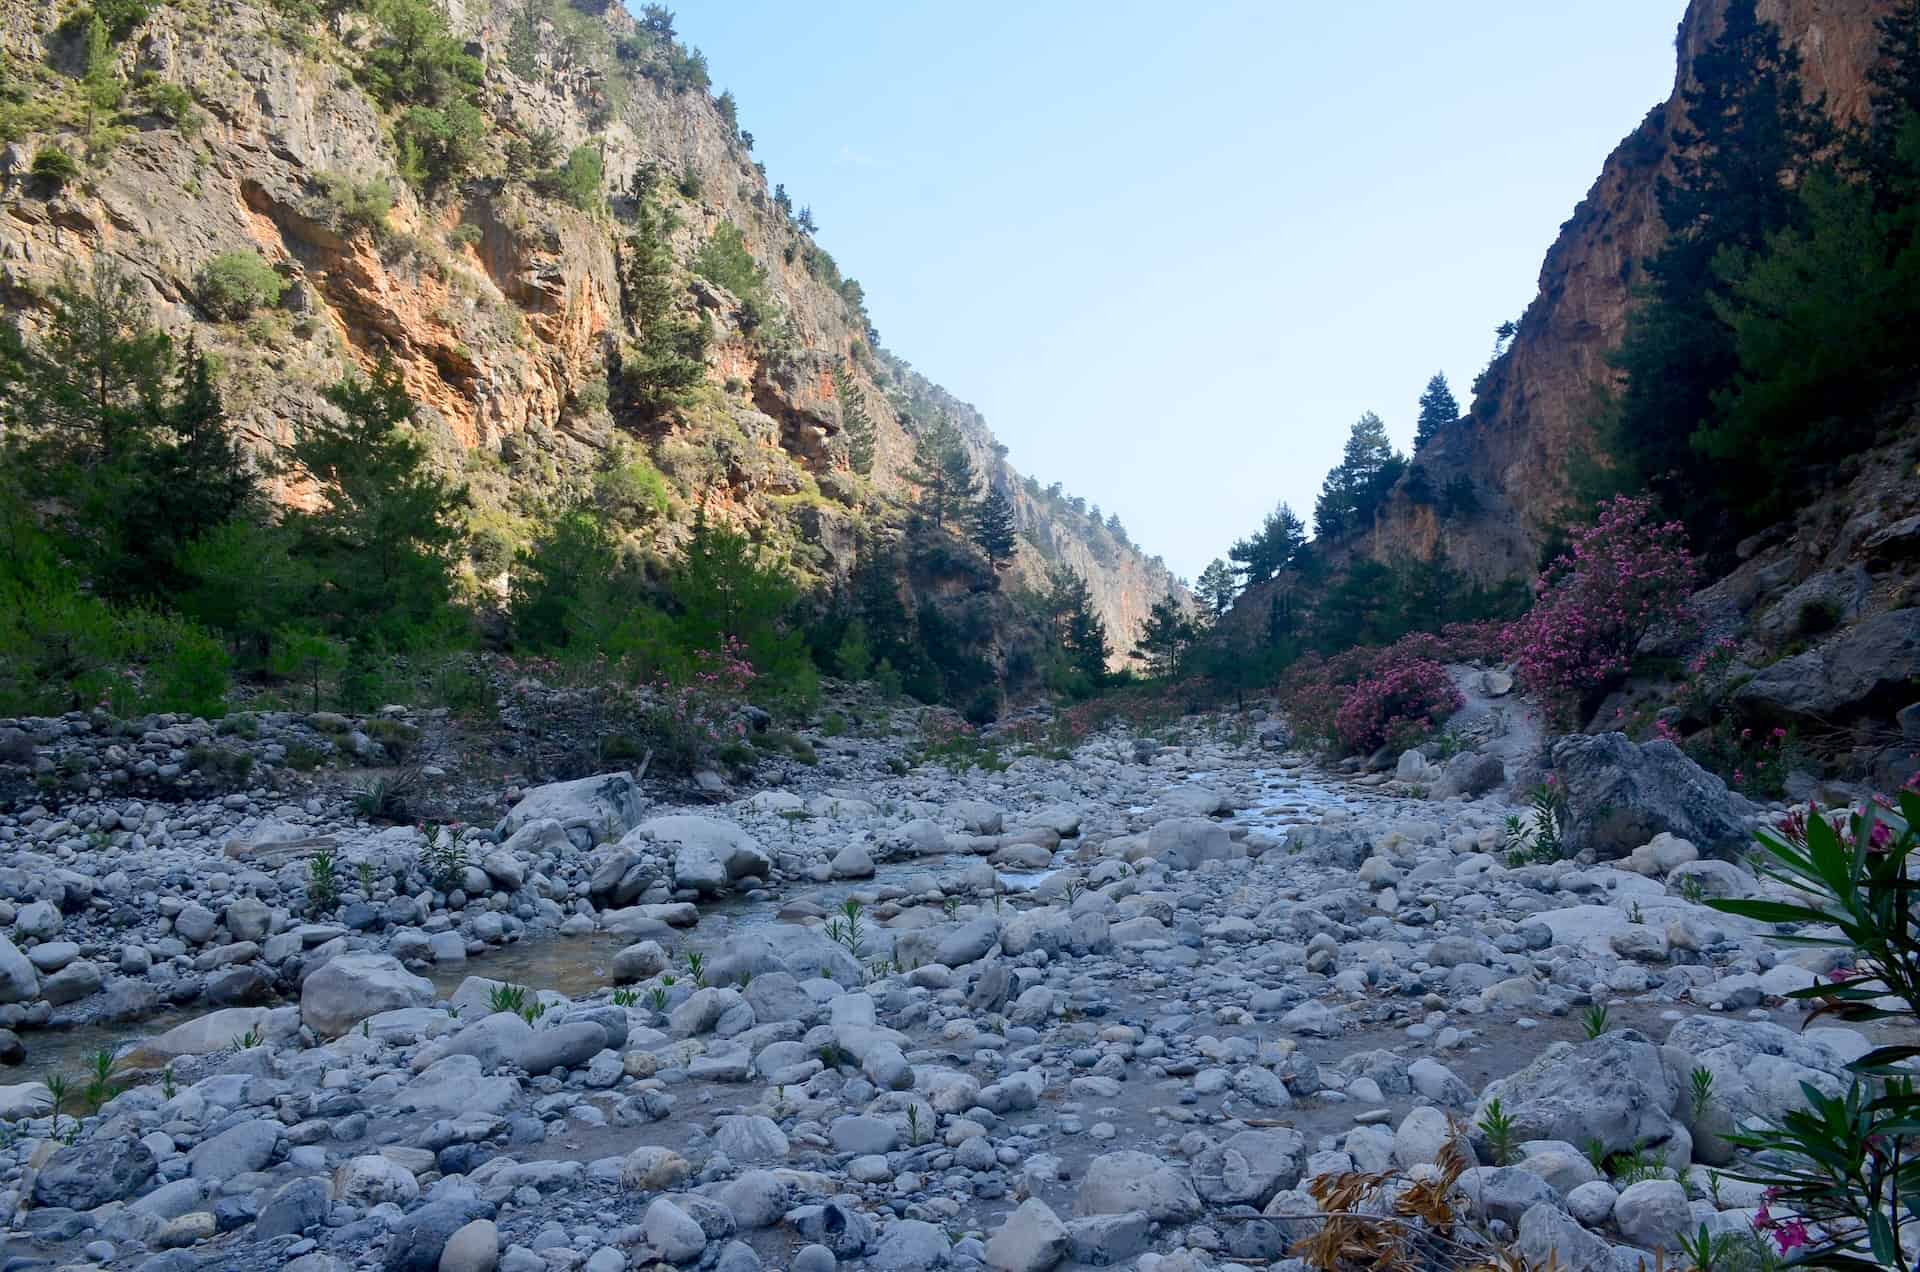 Hiking along the riverbed at the Samaria Gorge in Crete, Greece